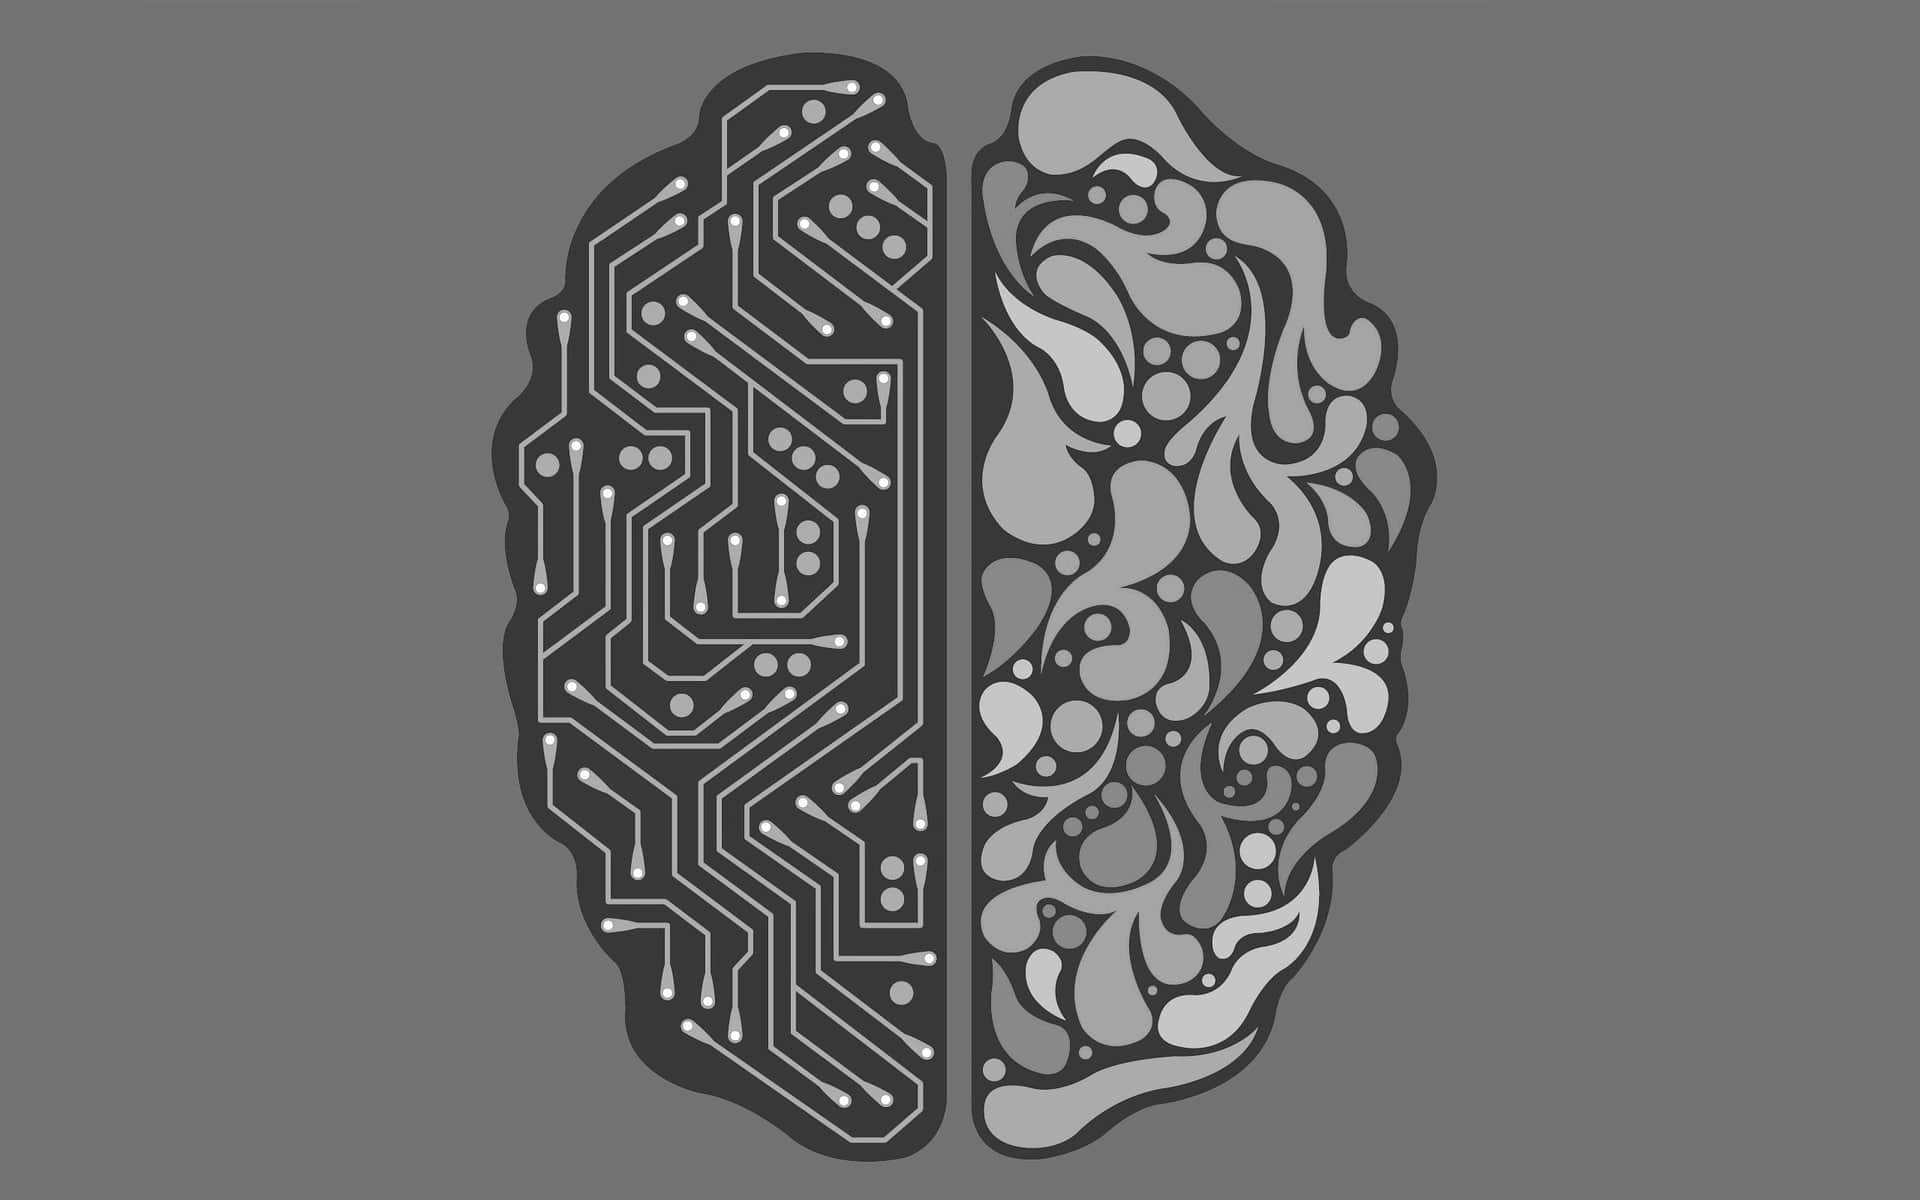 Neural Networks - Machine learning the next big thing | UpGrad Blog